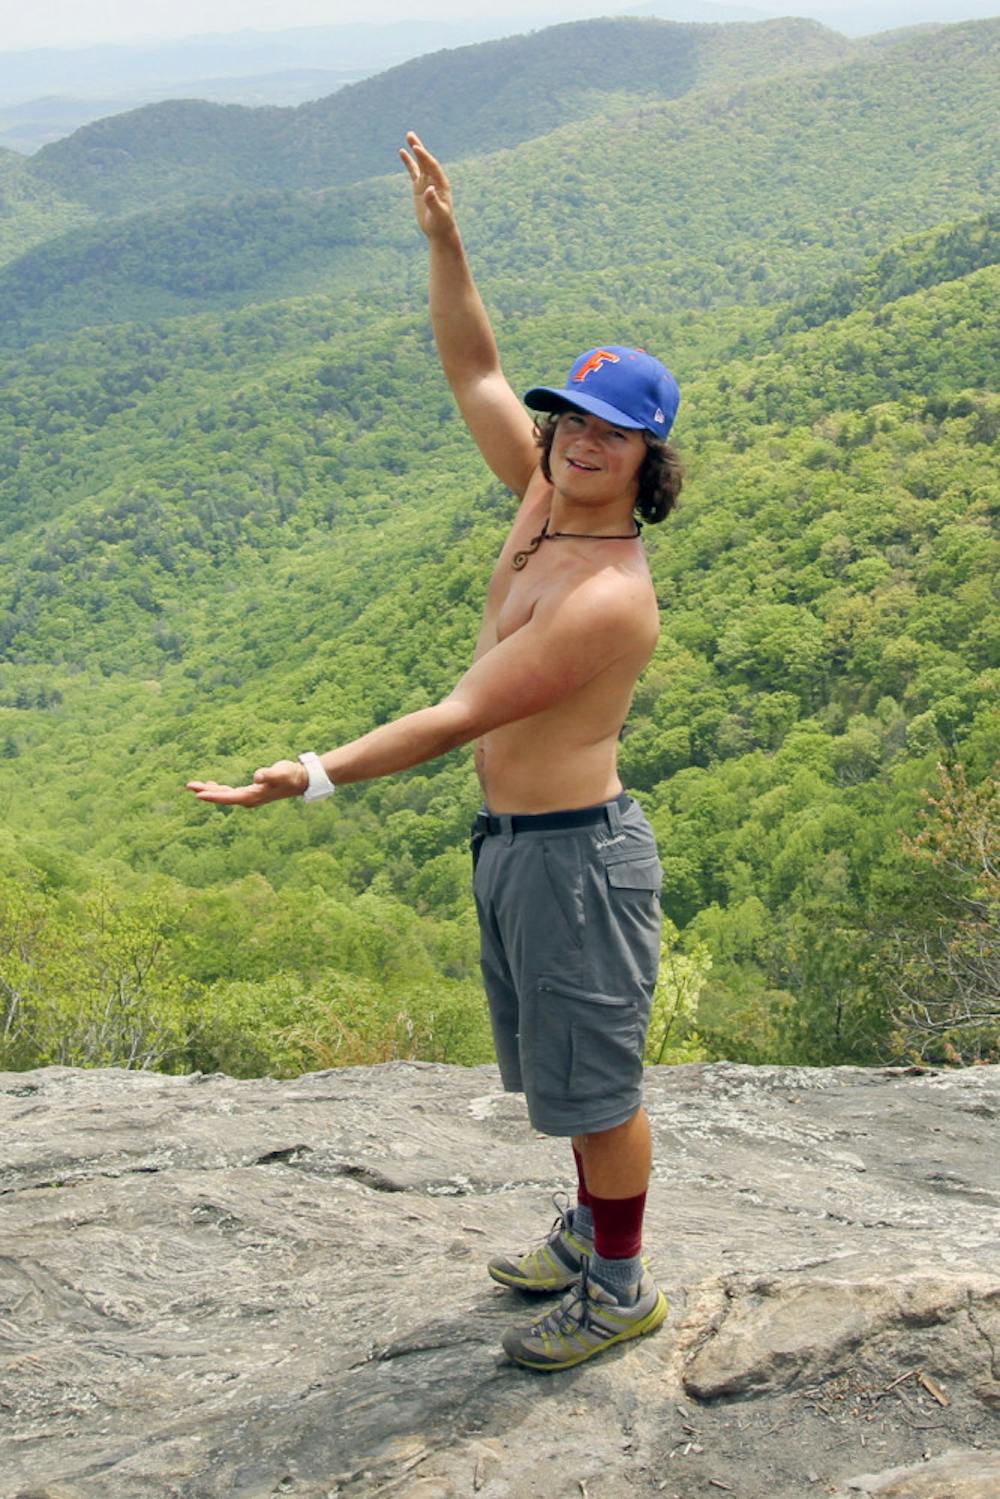 <p>Fillipe DeAndrade, filmmaker and University of Florida alum, poses for a photo. After his graduation from UF in 2012, DeAndrade created an award-winning short film based on his experiences hiking up the Appalachian trail.</p>